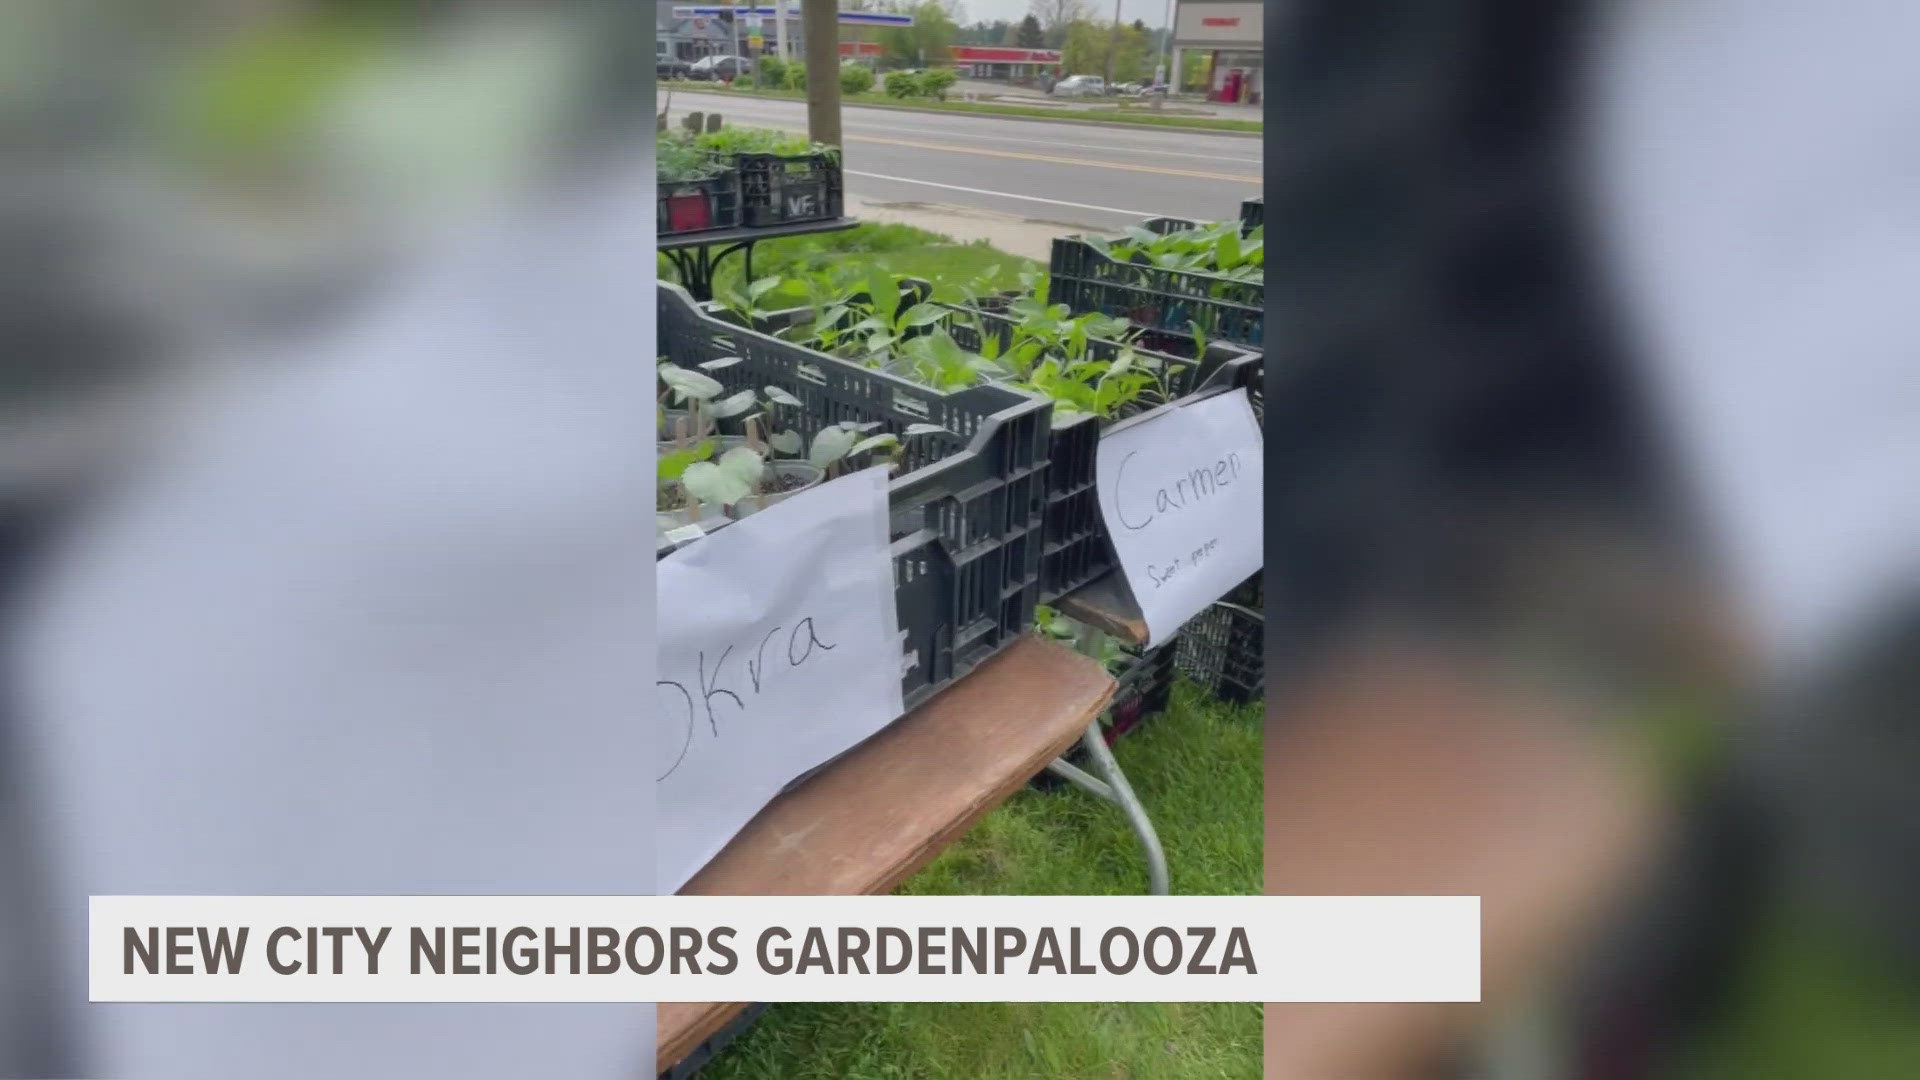 Gardenpalooza will have free workshops to help you grow a thriving garden this summer.